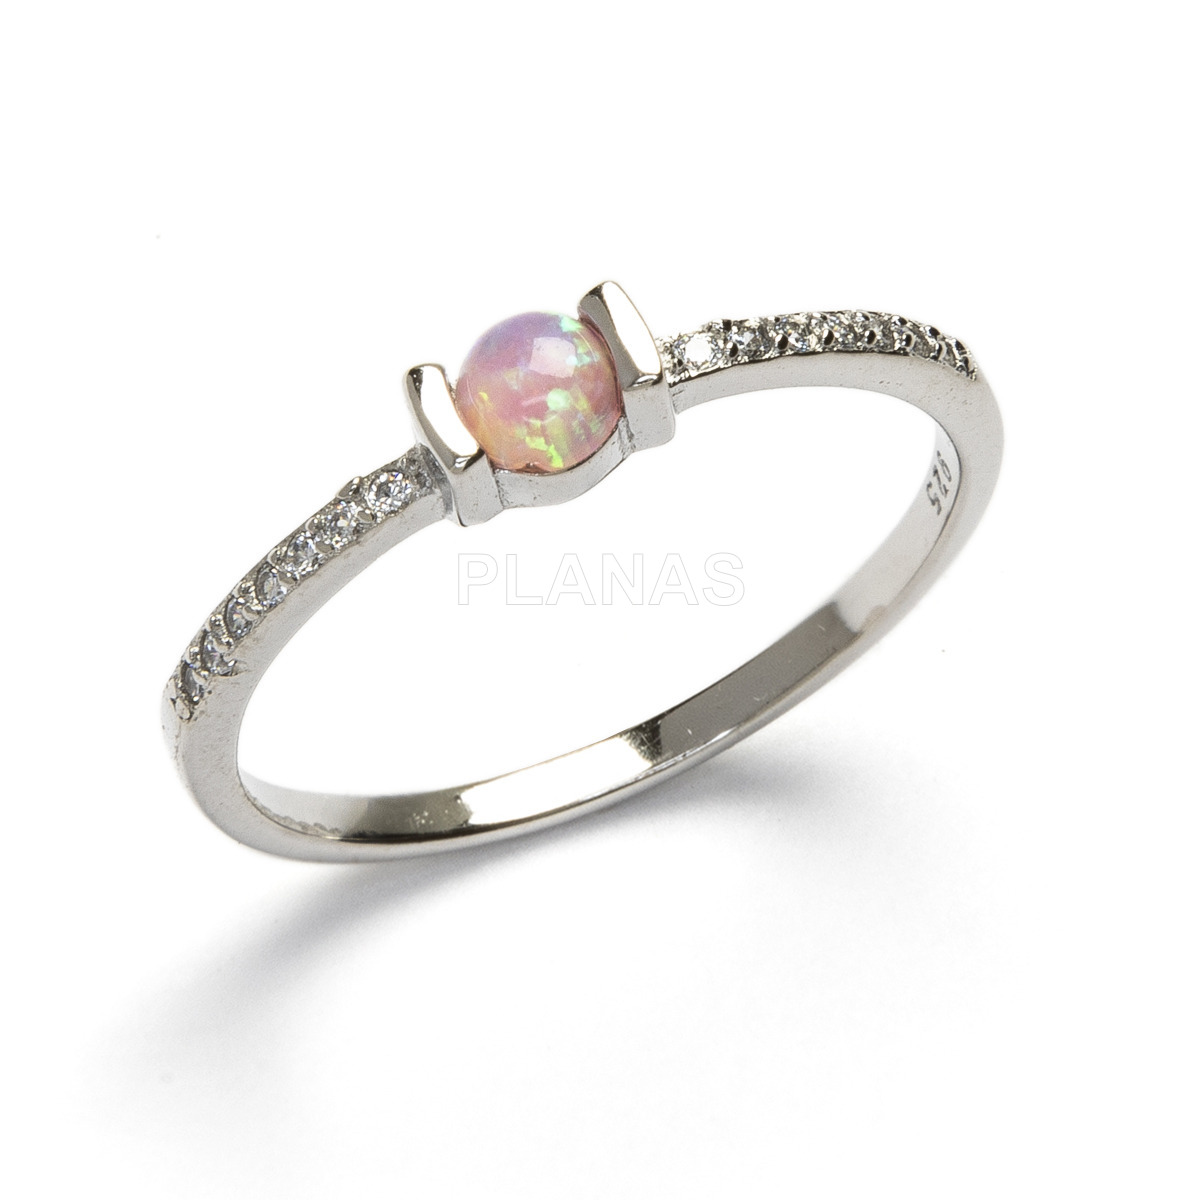 Rhodium plated sterling silver ring. pink opal.